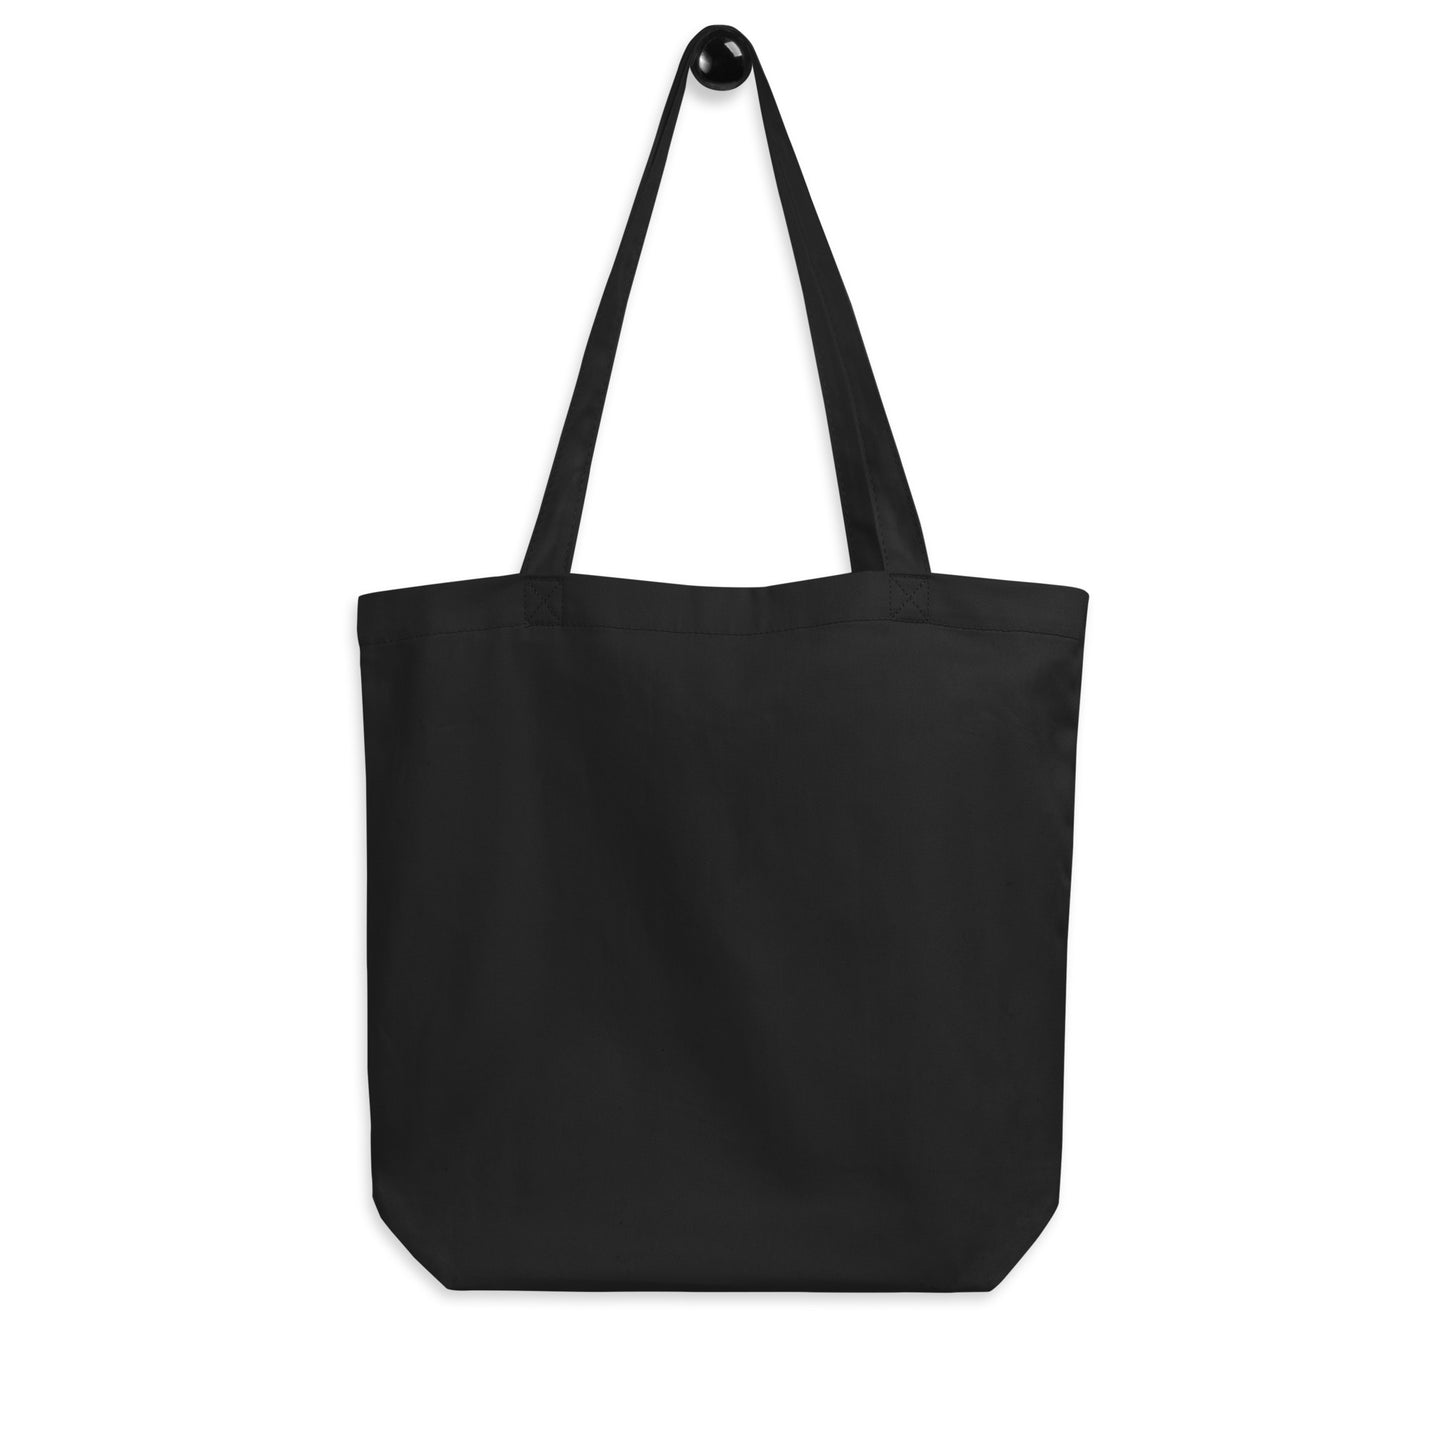 Unique Travel Gift Organic Tote - White Oval • YUL Montreal • YHM Designs - Image 05